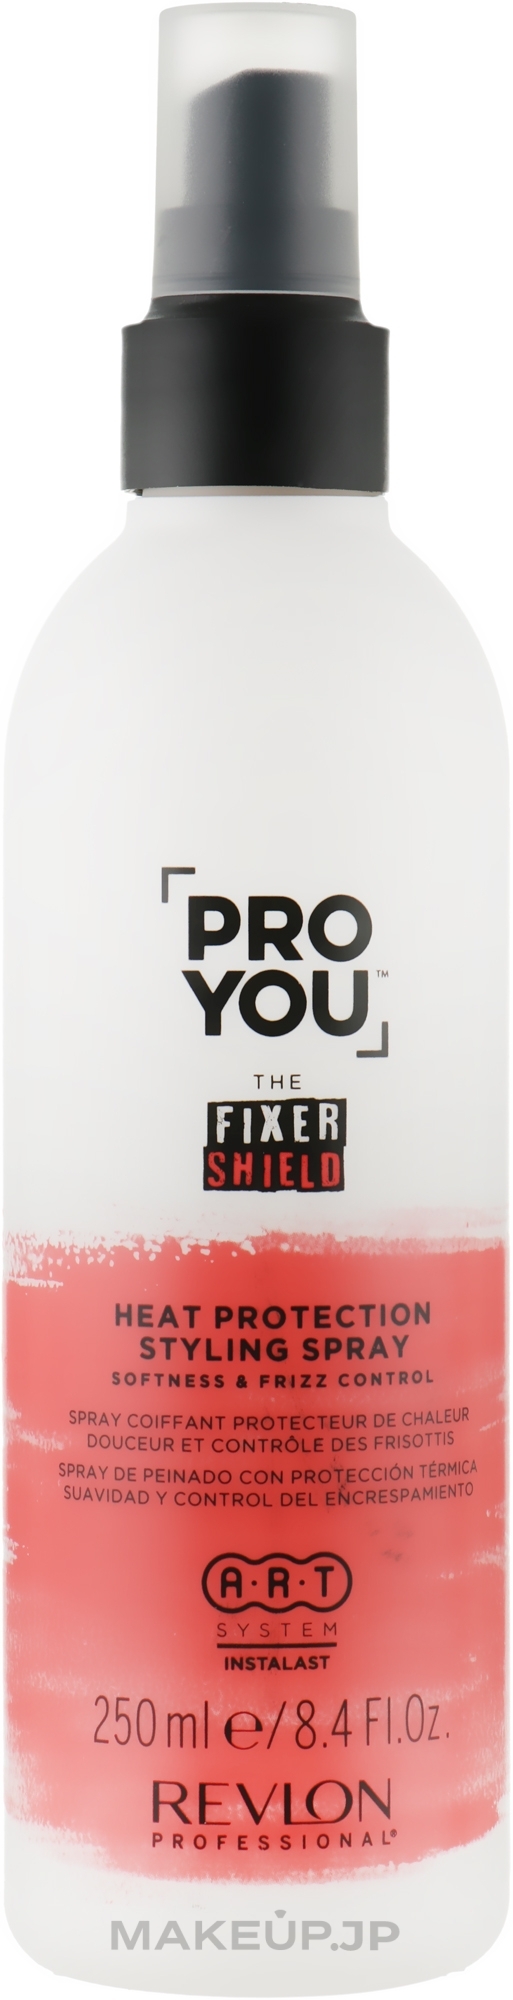 Heat Protection Styling Spray - Revlon Professional Pro You The Fixer Shield Heat Protection Styling Spray — photo 250 ml